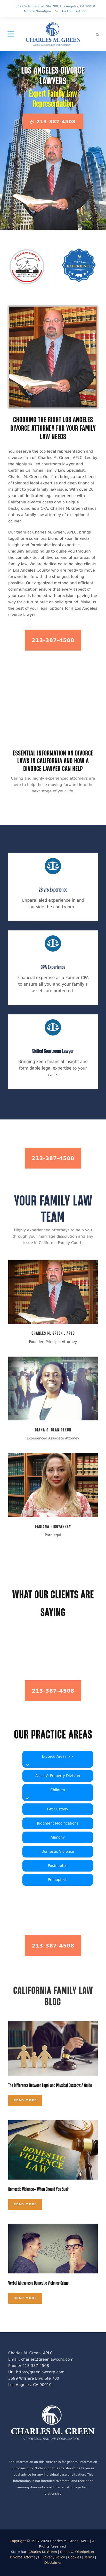 Charles M. Green, APLC - Los Angeles CA Lawyers